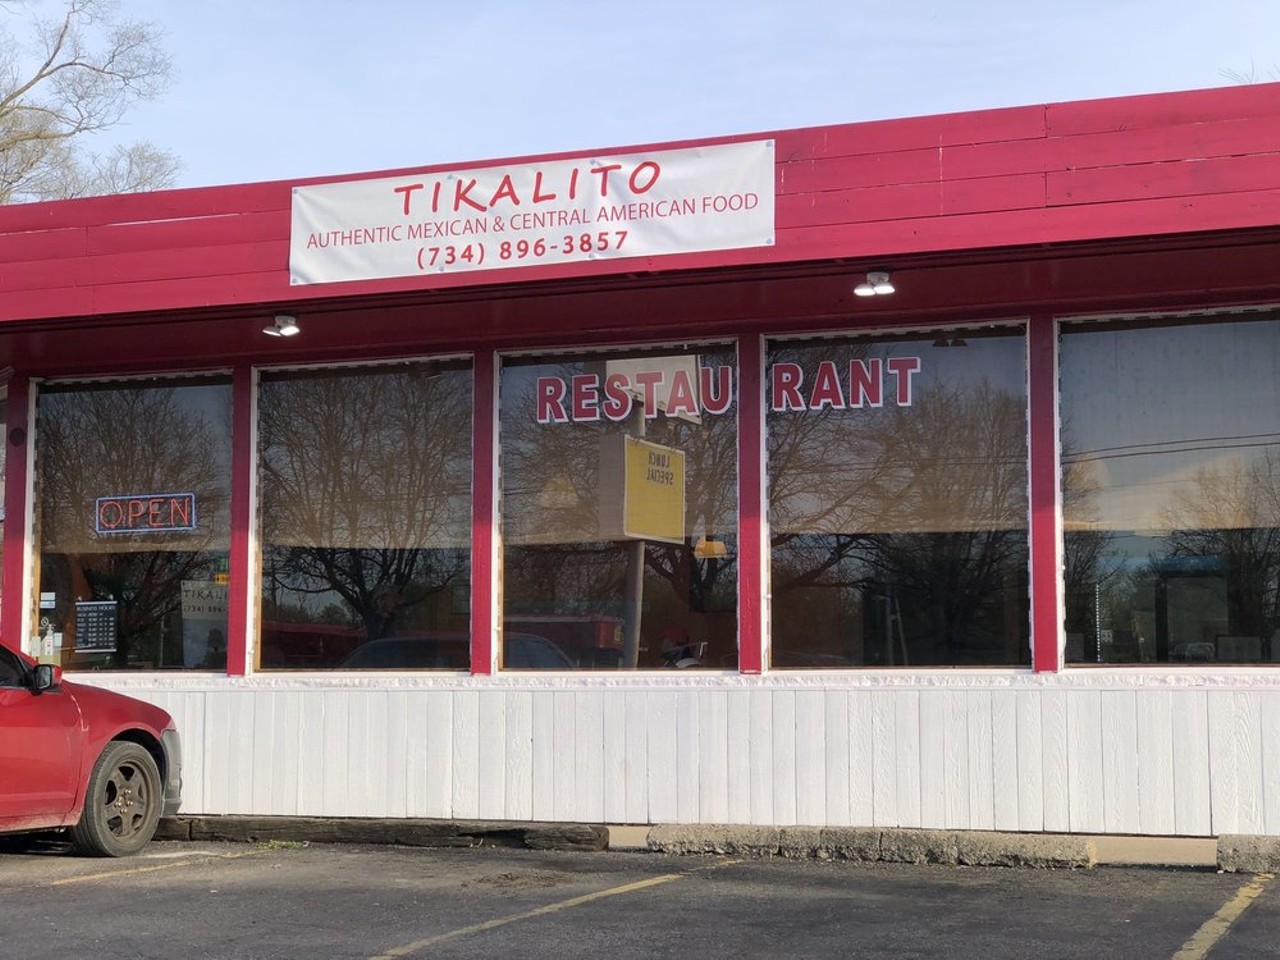 Tikalito
1346 E. Michigan Ave.; 734-896-3857
This new authentic Mexican restaurant just opened this year in the spot where HANA Korean used to live. While we’re sad the old gem is gone, there couldn’t have been a better replacement.